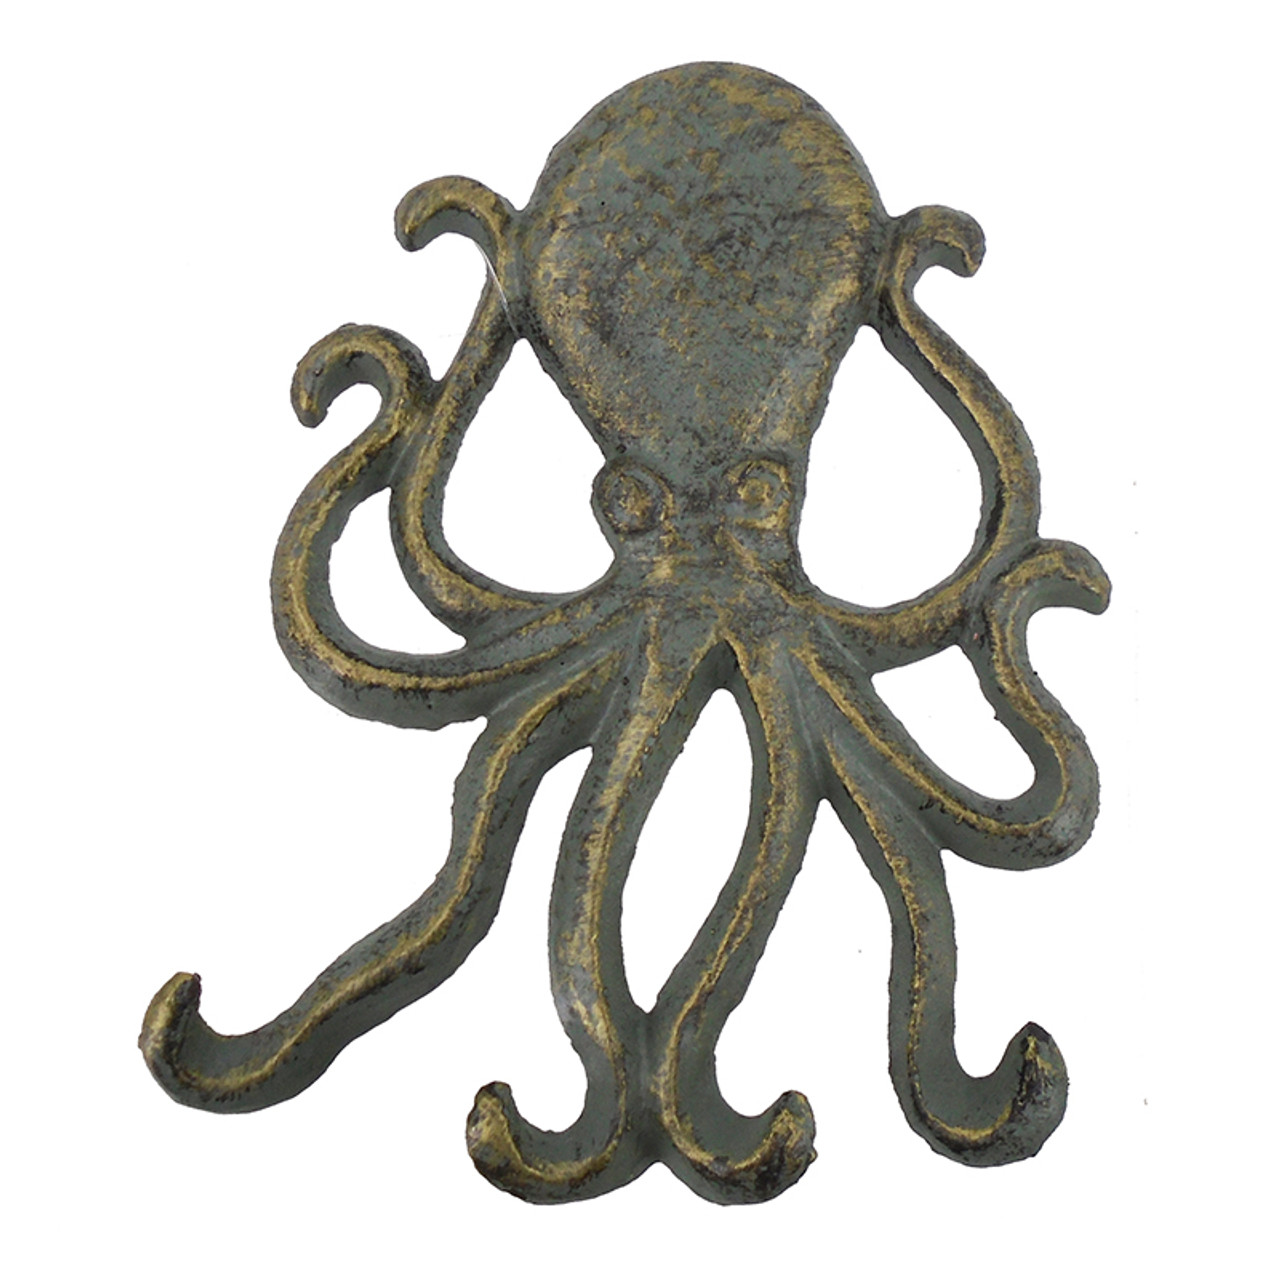 Octopus Cast Iron Wall Hook / Coastal or Beach House Decor / Whimsical  Metal Wall Art / Turquoise or Pick Color / Pool Hook / Sea Accent 